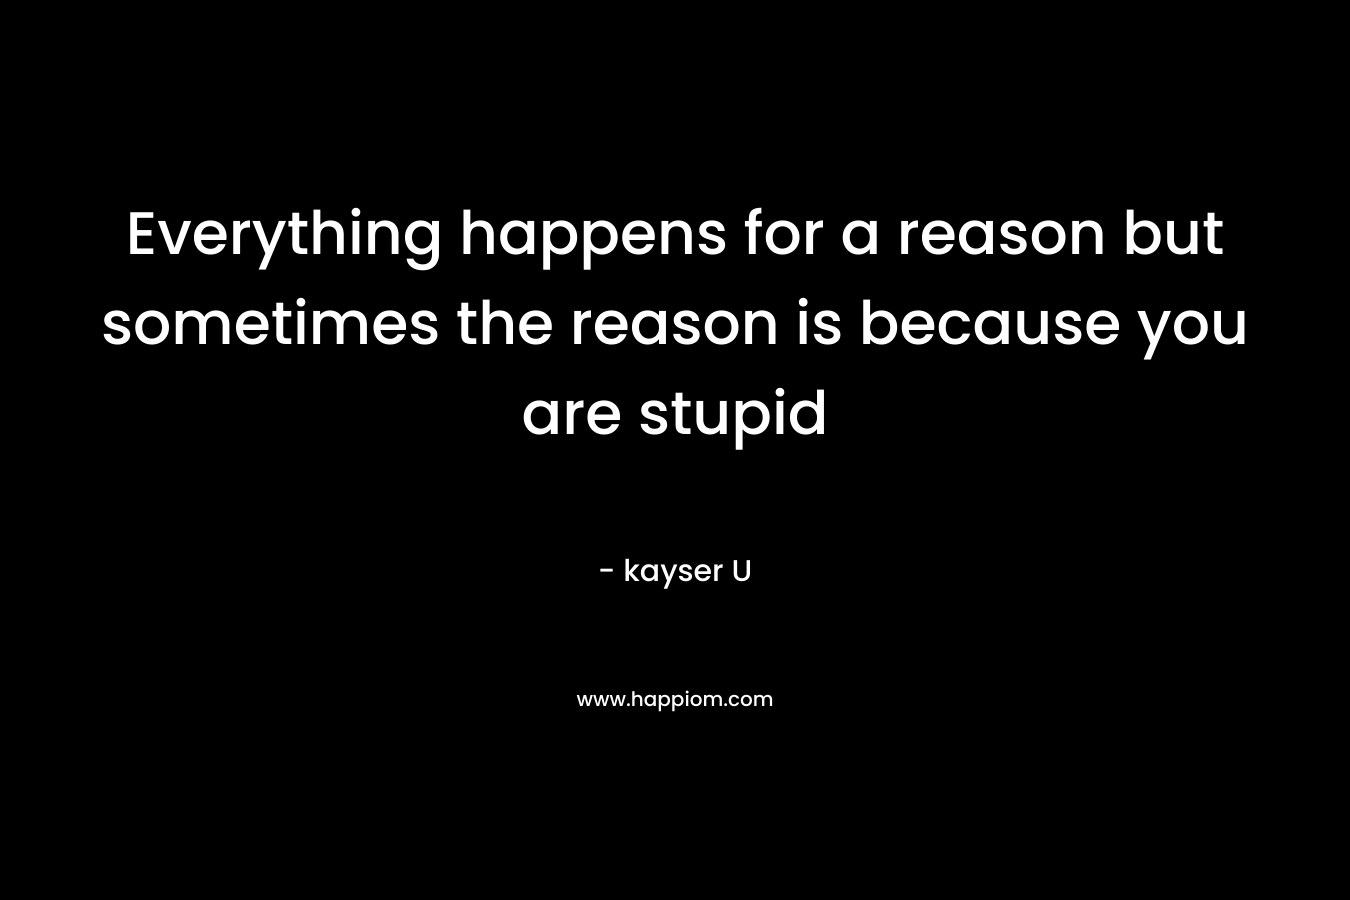 Everything happens for a reason but sometimes the reason is because you are stupid